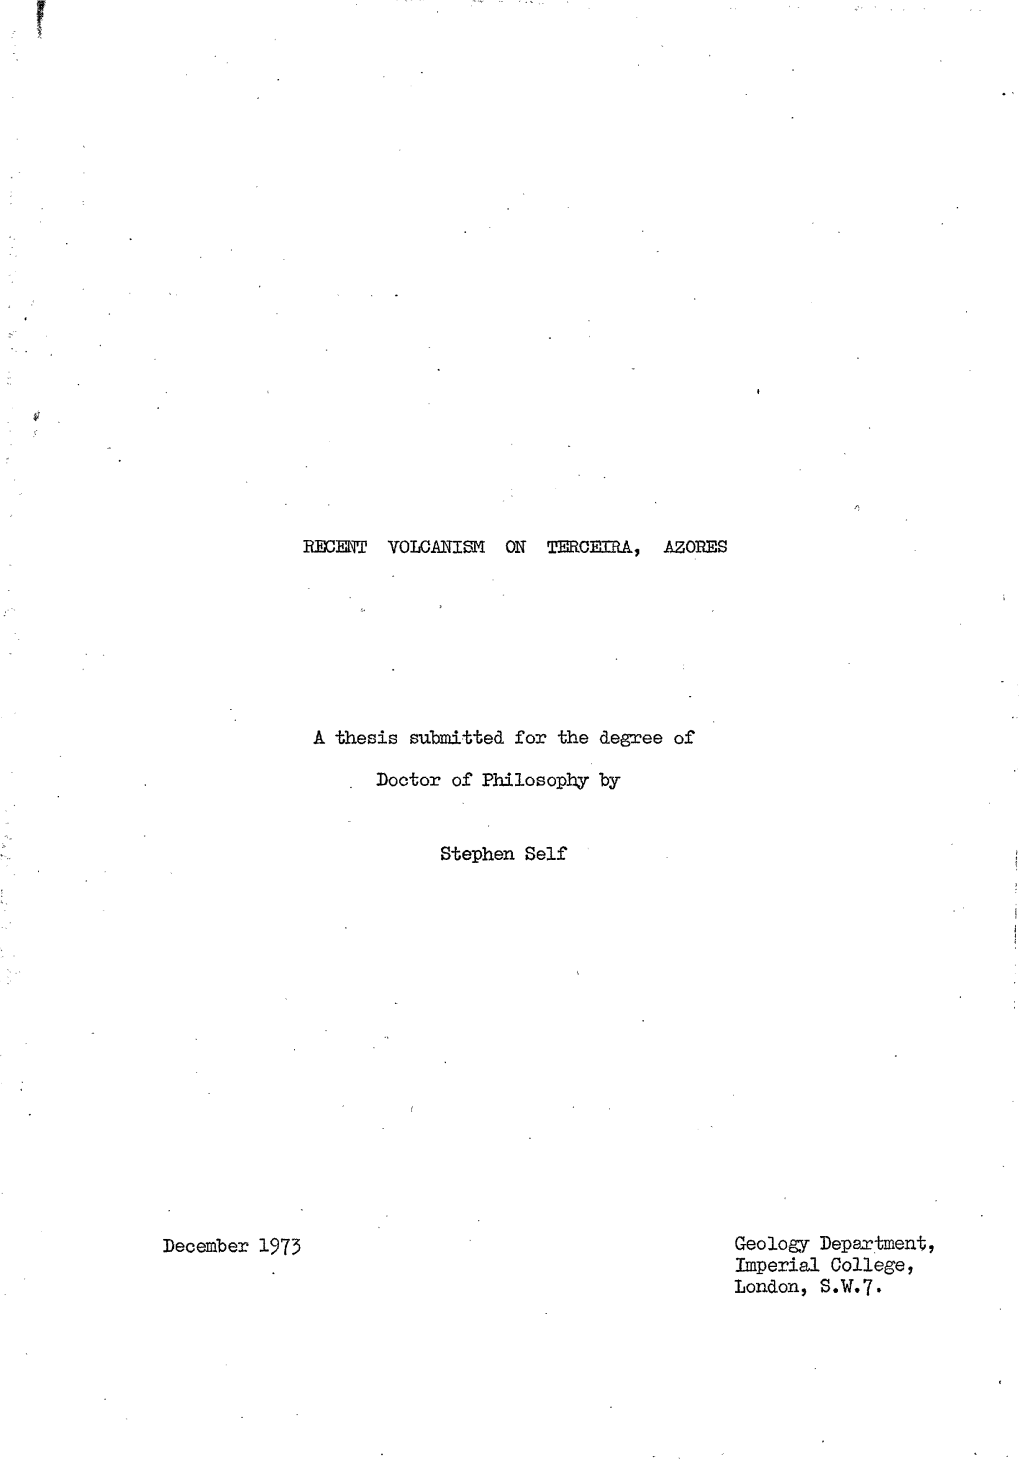 RECENT VOLCANISM on TERCEIRA, AZORES a Thesis Submitted for the Degree of Doctor of Philosophy by Stephen Self December 1973